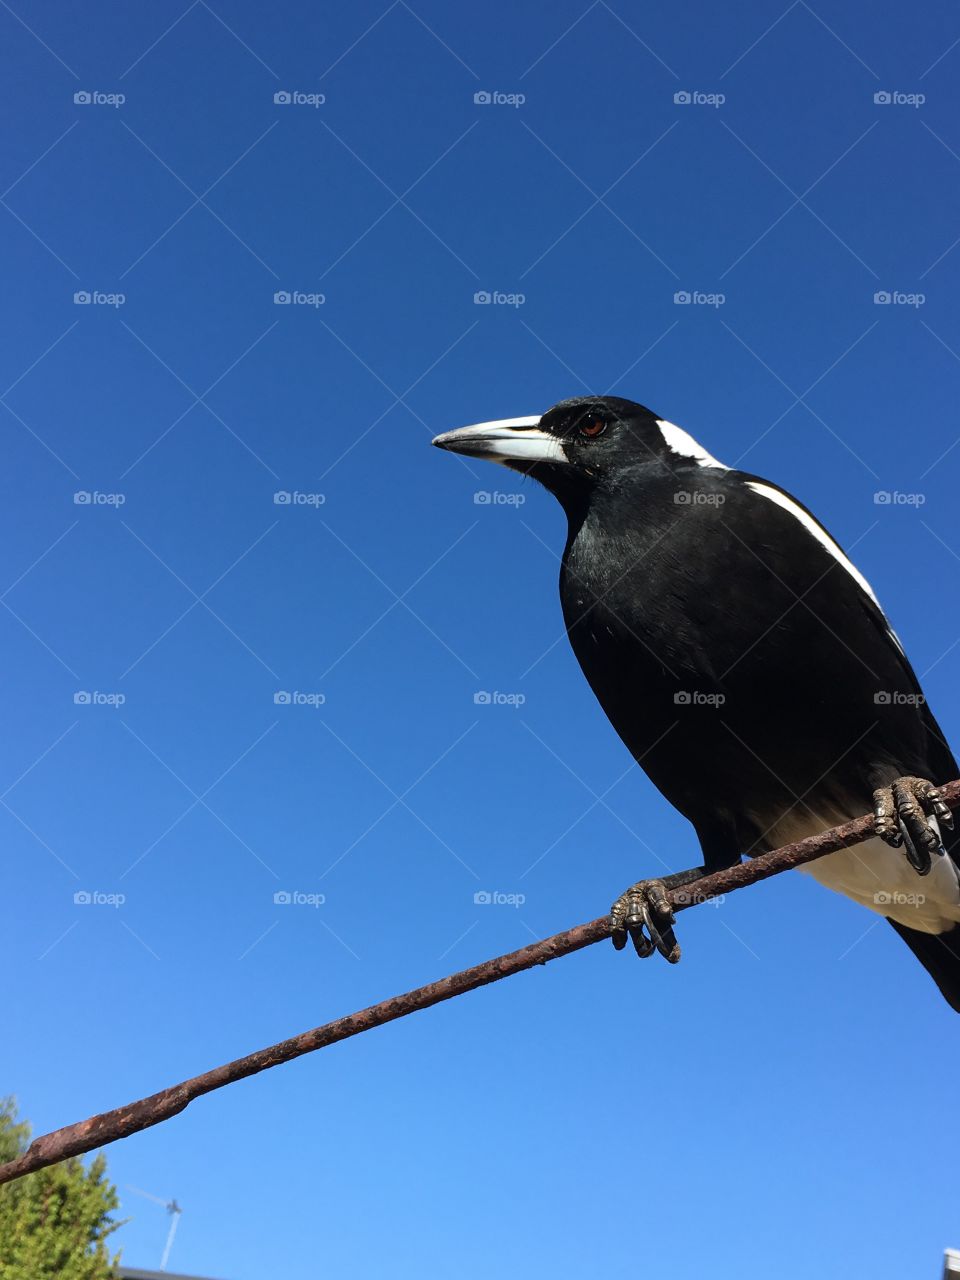 Magpie watching, large magpie perched on a wire high in a vivid bright clear blue sky